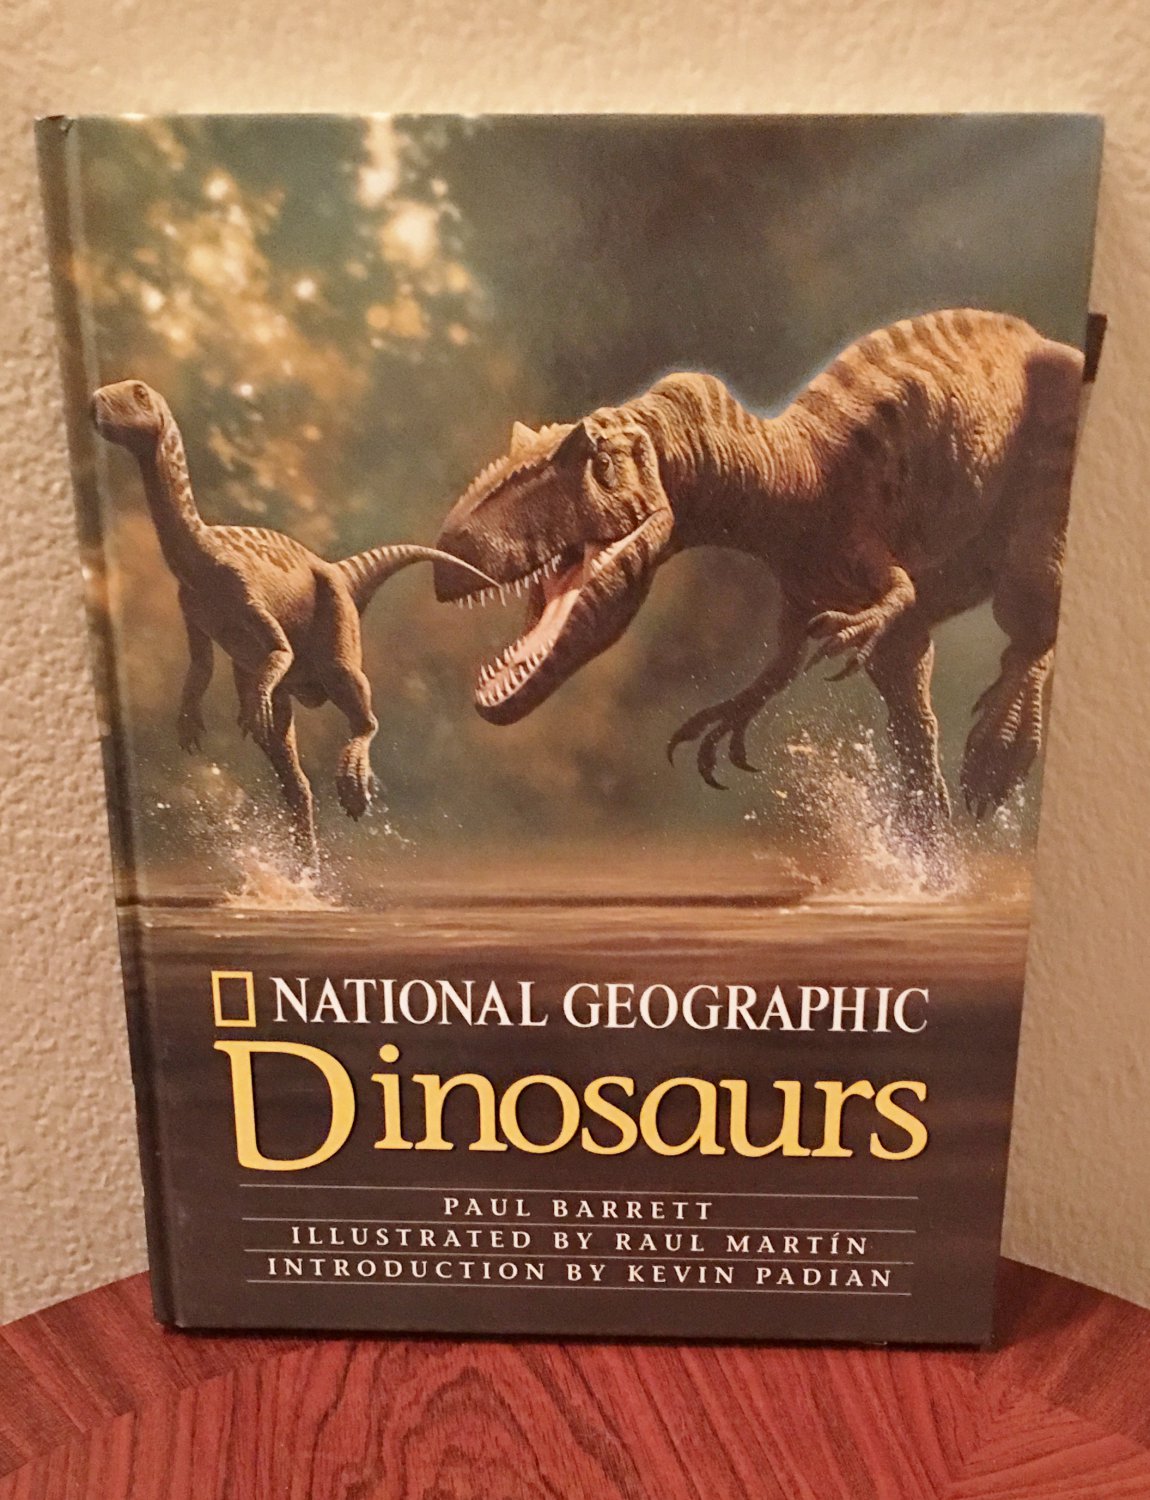 New NATIONAL GEOGRAPHIC DINOSAURS Hard Cover Coffee Table Book ...